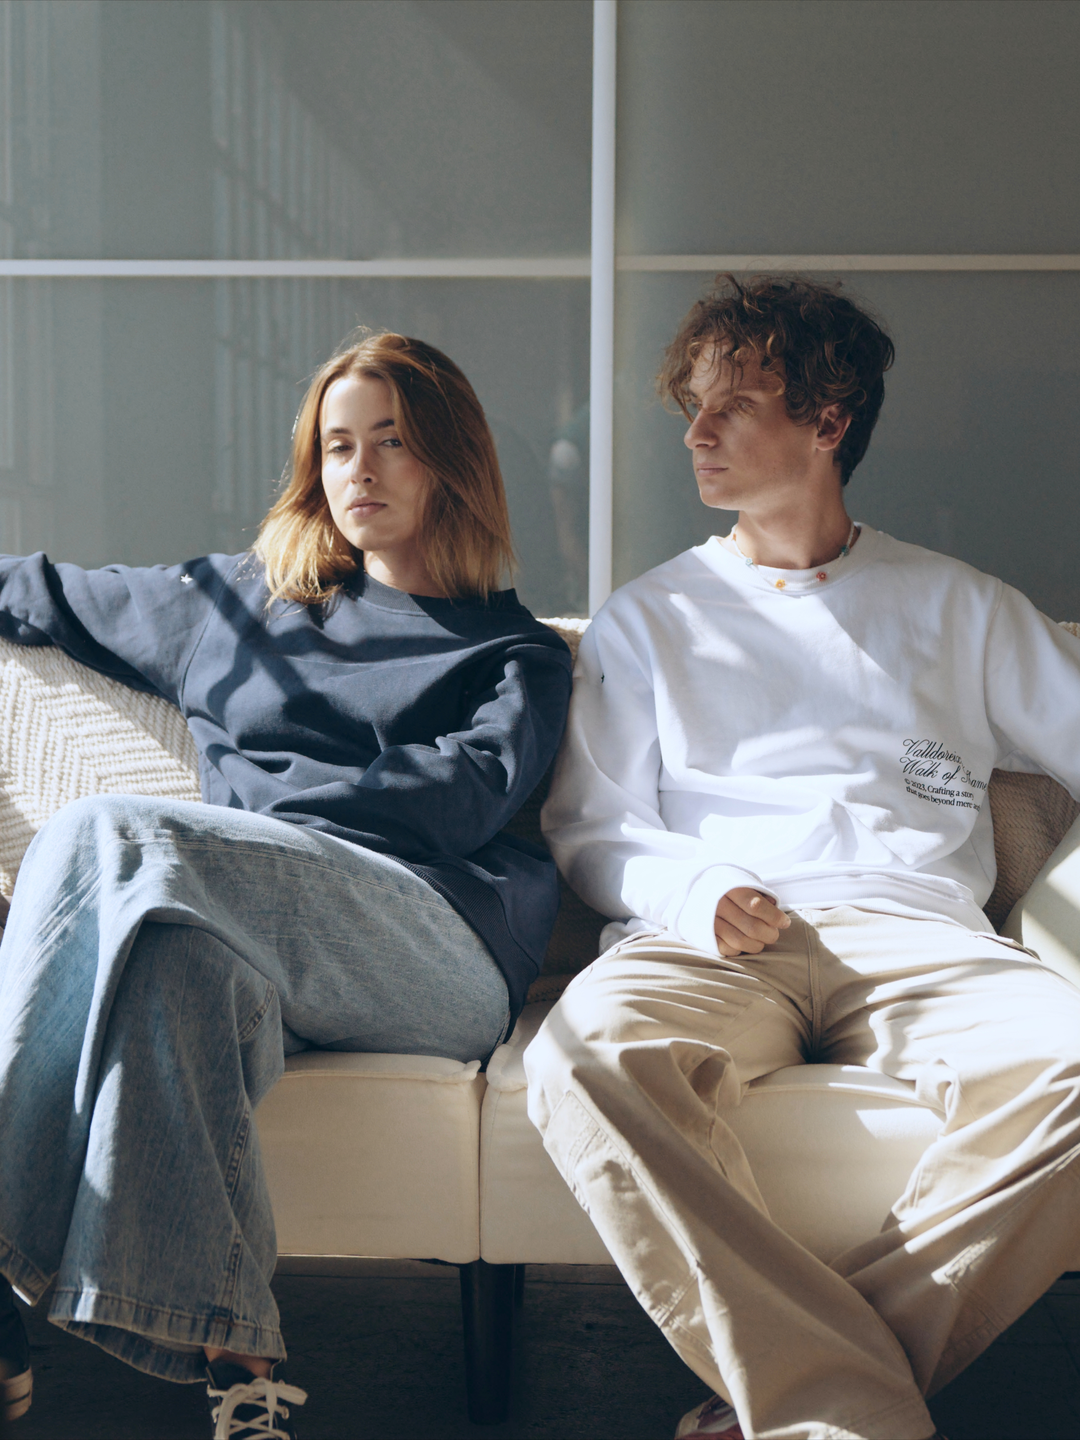 Female and male apparel models inside sitting on a couch wearing long sleeve shirts.